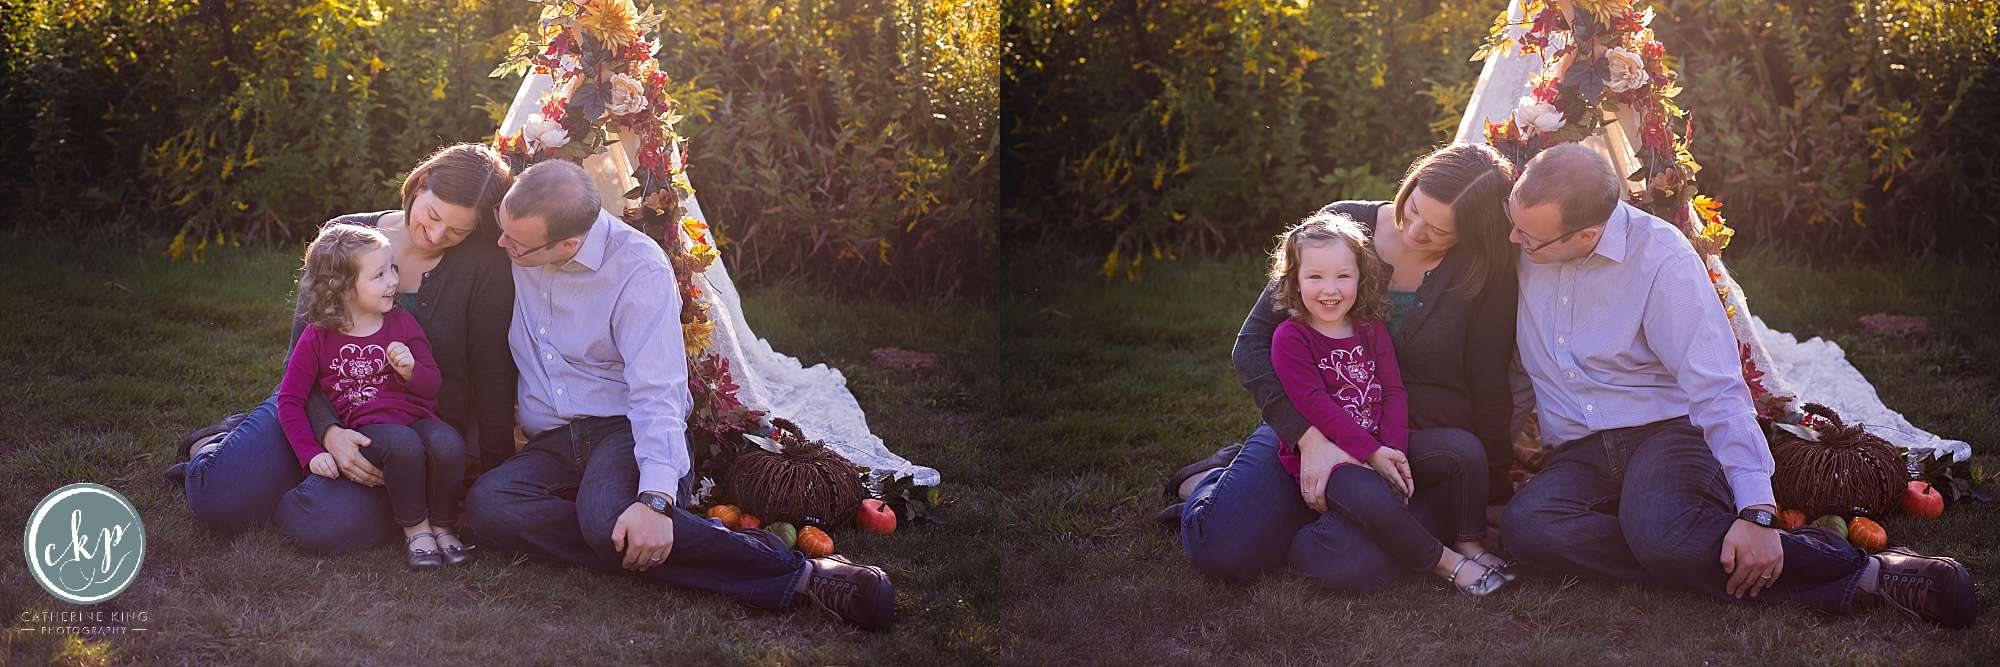 fall family photography with a diy teepee by catherine king photography a ct family photographer